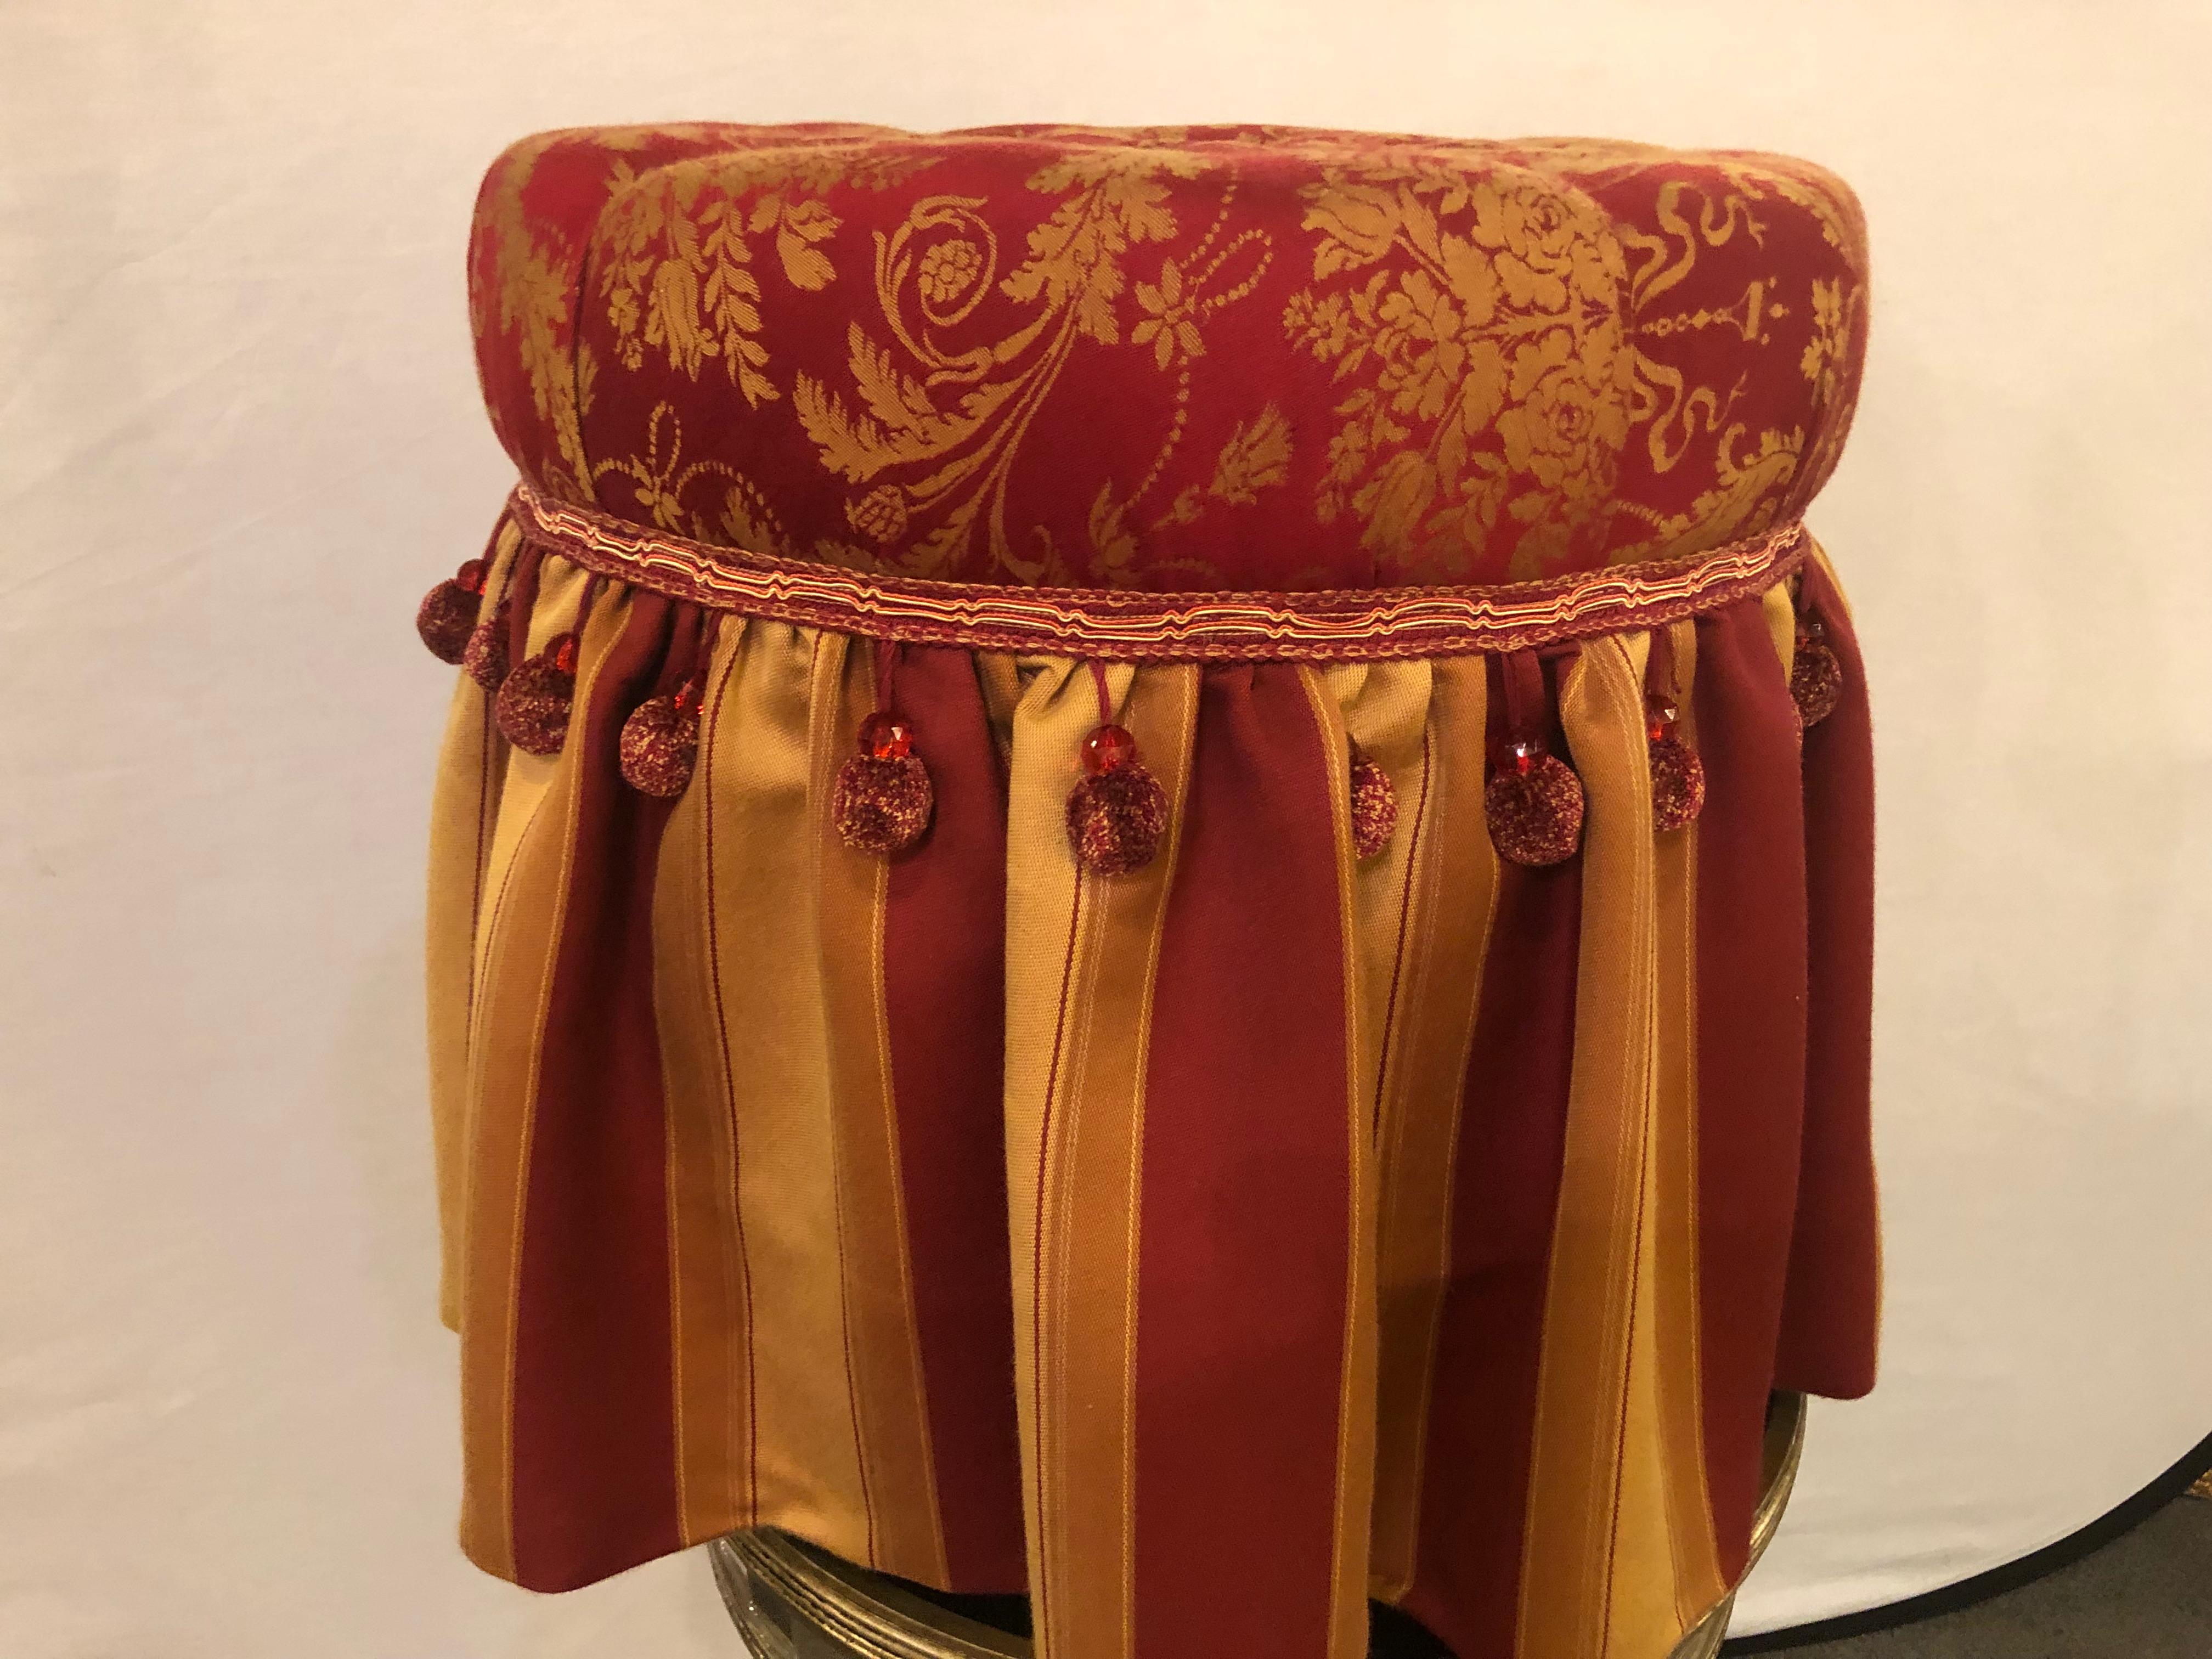 Deco Upholstered Tufted Red and Gilt Decorated Ottoman or Footstool im Zustand „Gut“ in Stamford, CT